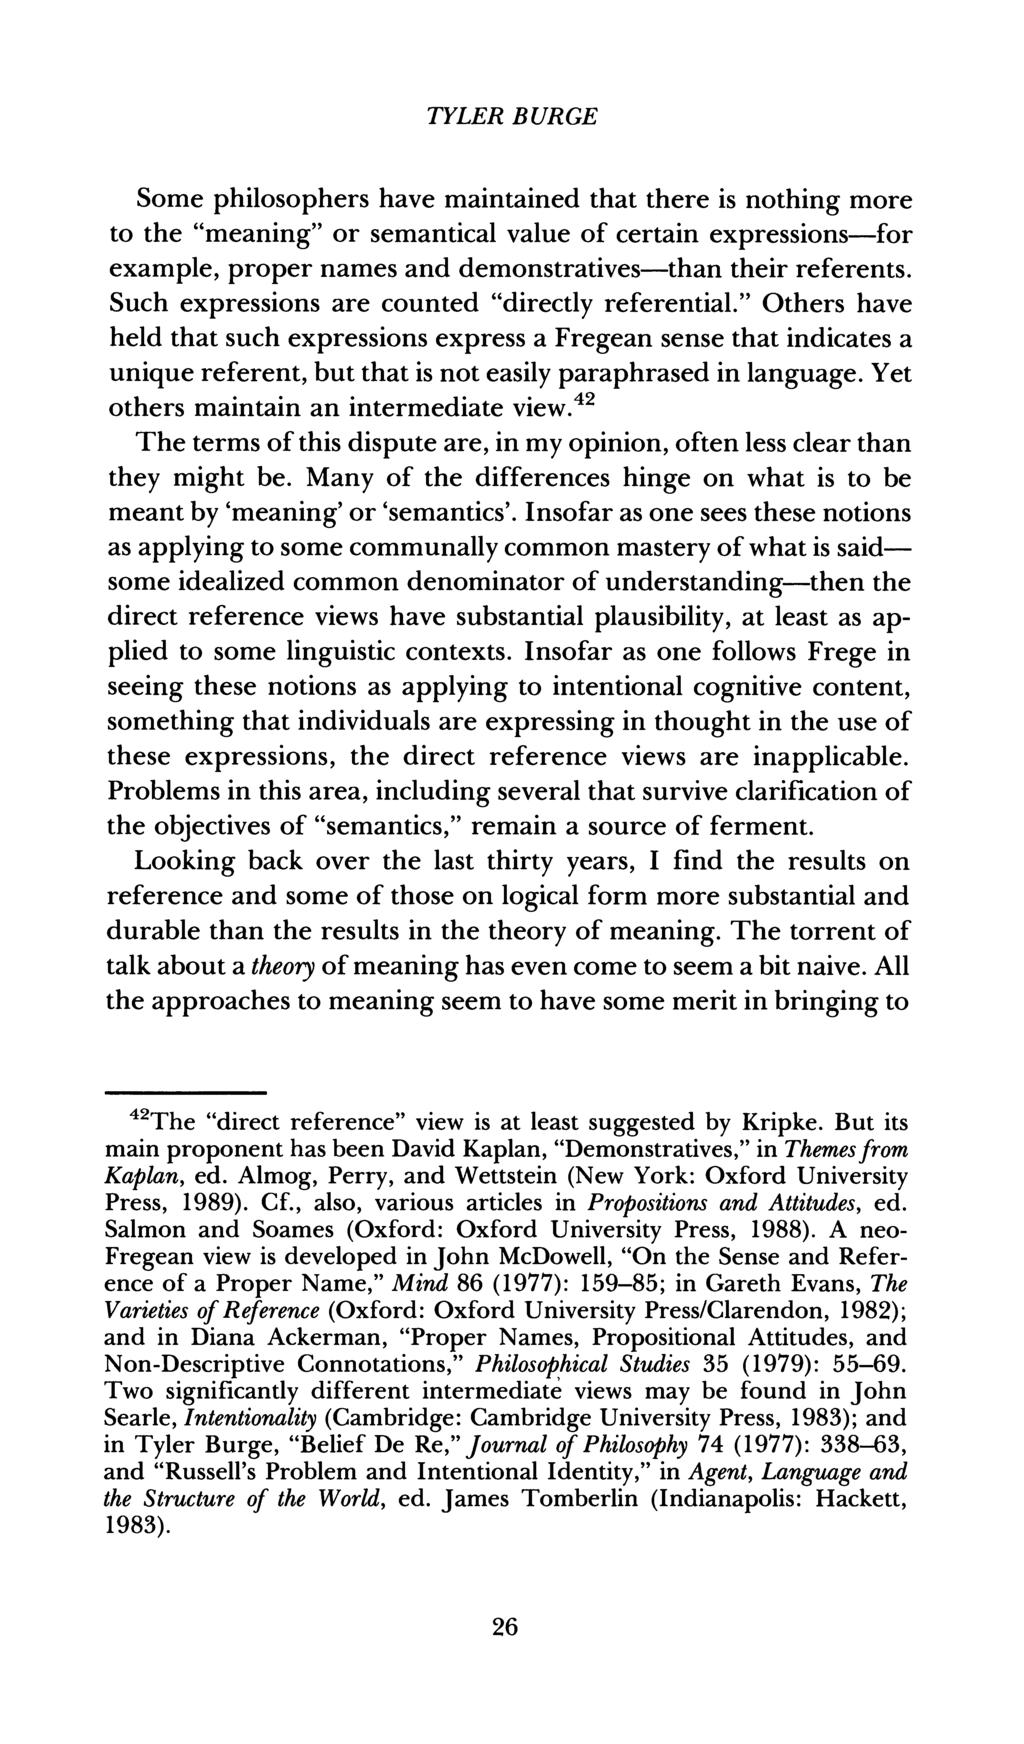 TYLER BURGE Some philosophers have maintained that there is nothing more to the "meaning" or semantical value of certain expressions-for example, proper names and demonstratives-than their referents.